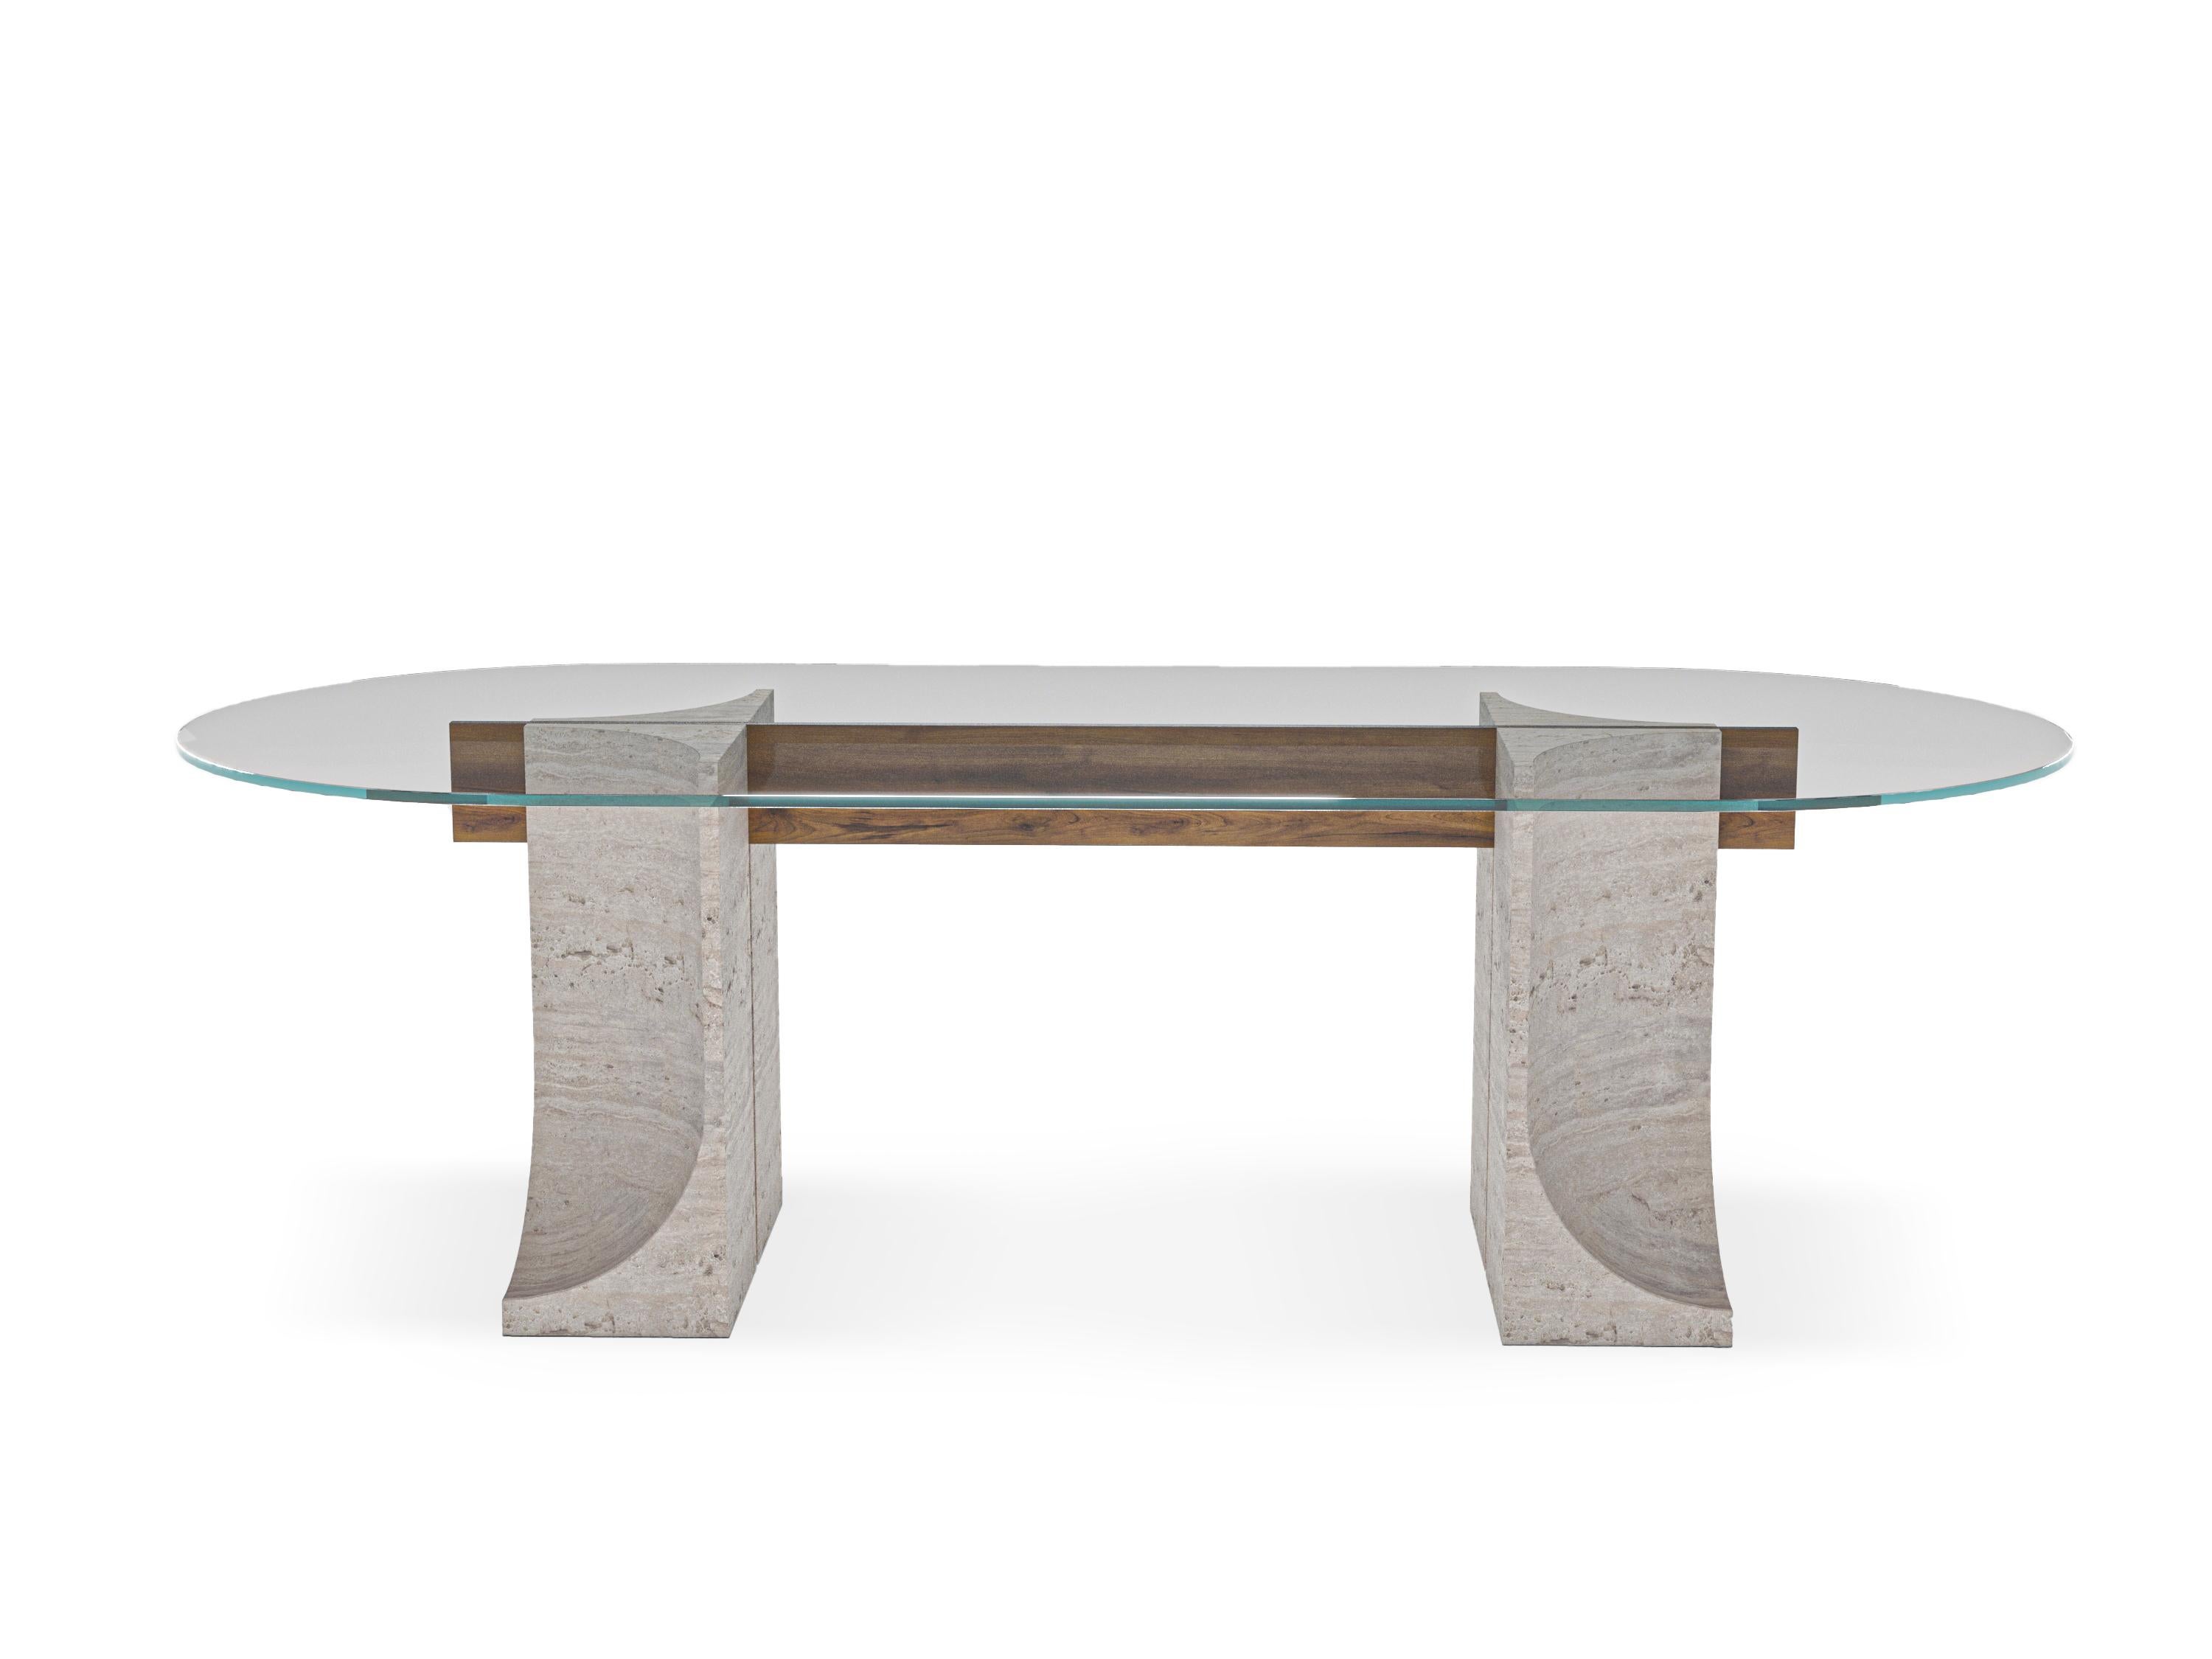 Unique Edge dining table by Collector
Dimensions: W 250 x D 110 x H 78 cm
Materials: Glass, Travertino, Wood
Other materials available.

The Collector brand aims to be part of the daily life by fusing furniture to our home routine and